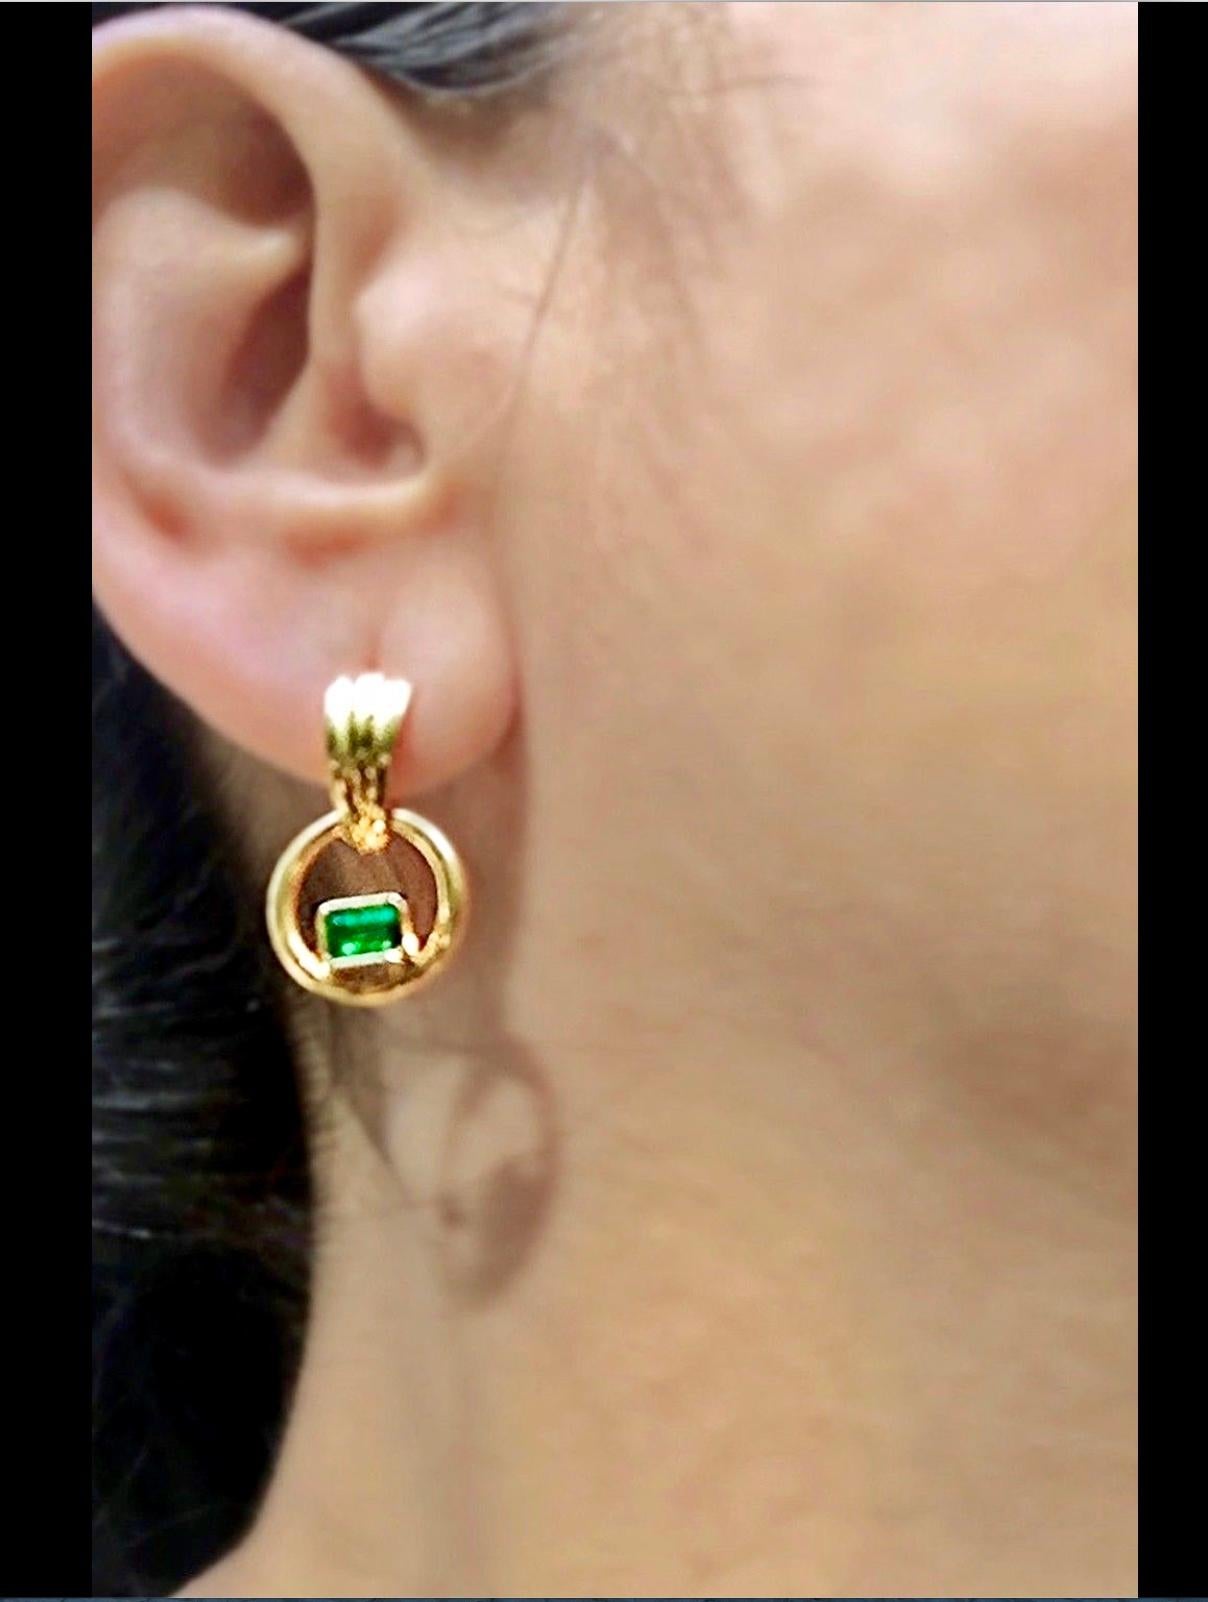 Classic Clip-on Dangle Earrings Natural Colombian Emerald
Total length Earrings: 22.0mm
Shape or Cut : Emerald Cut
Average Color/Clarity : AAA+ Medium Green/ Clarity VS 
Emerald Weight : Over 0.50 carats
Emerald measurements: 4.5x3.5mm
Total length